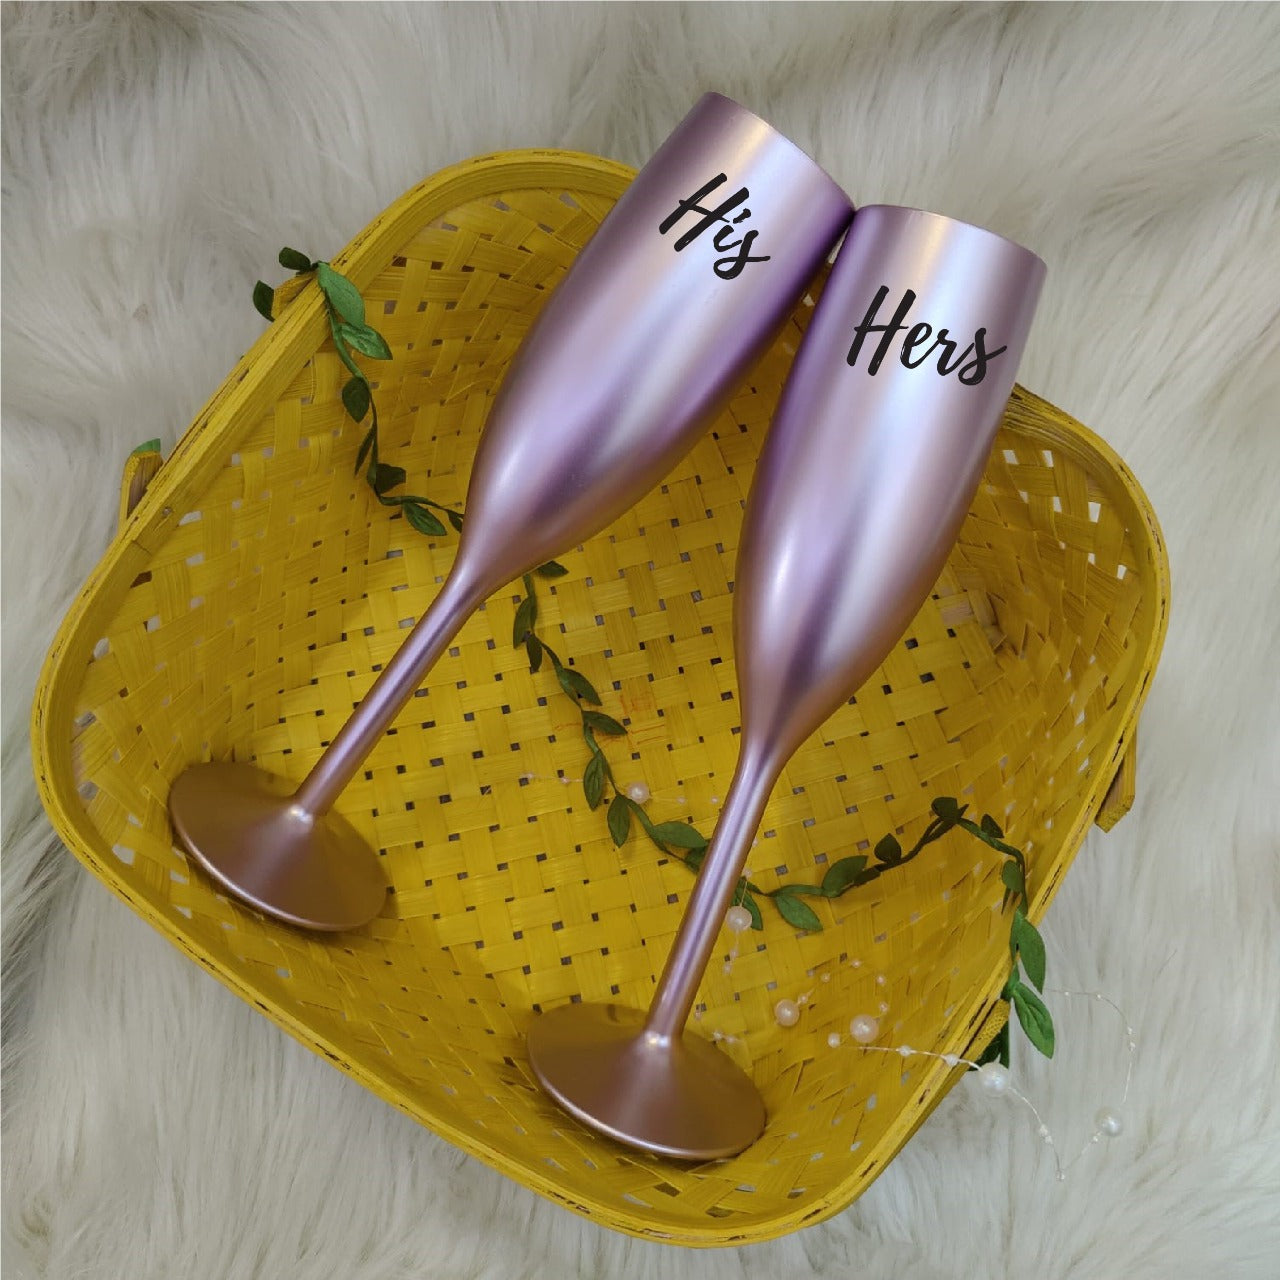 Unbreakable Flutes - His & Her Champagne Glasses - Set of 2 - Loveable lilac